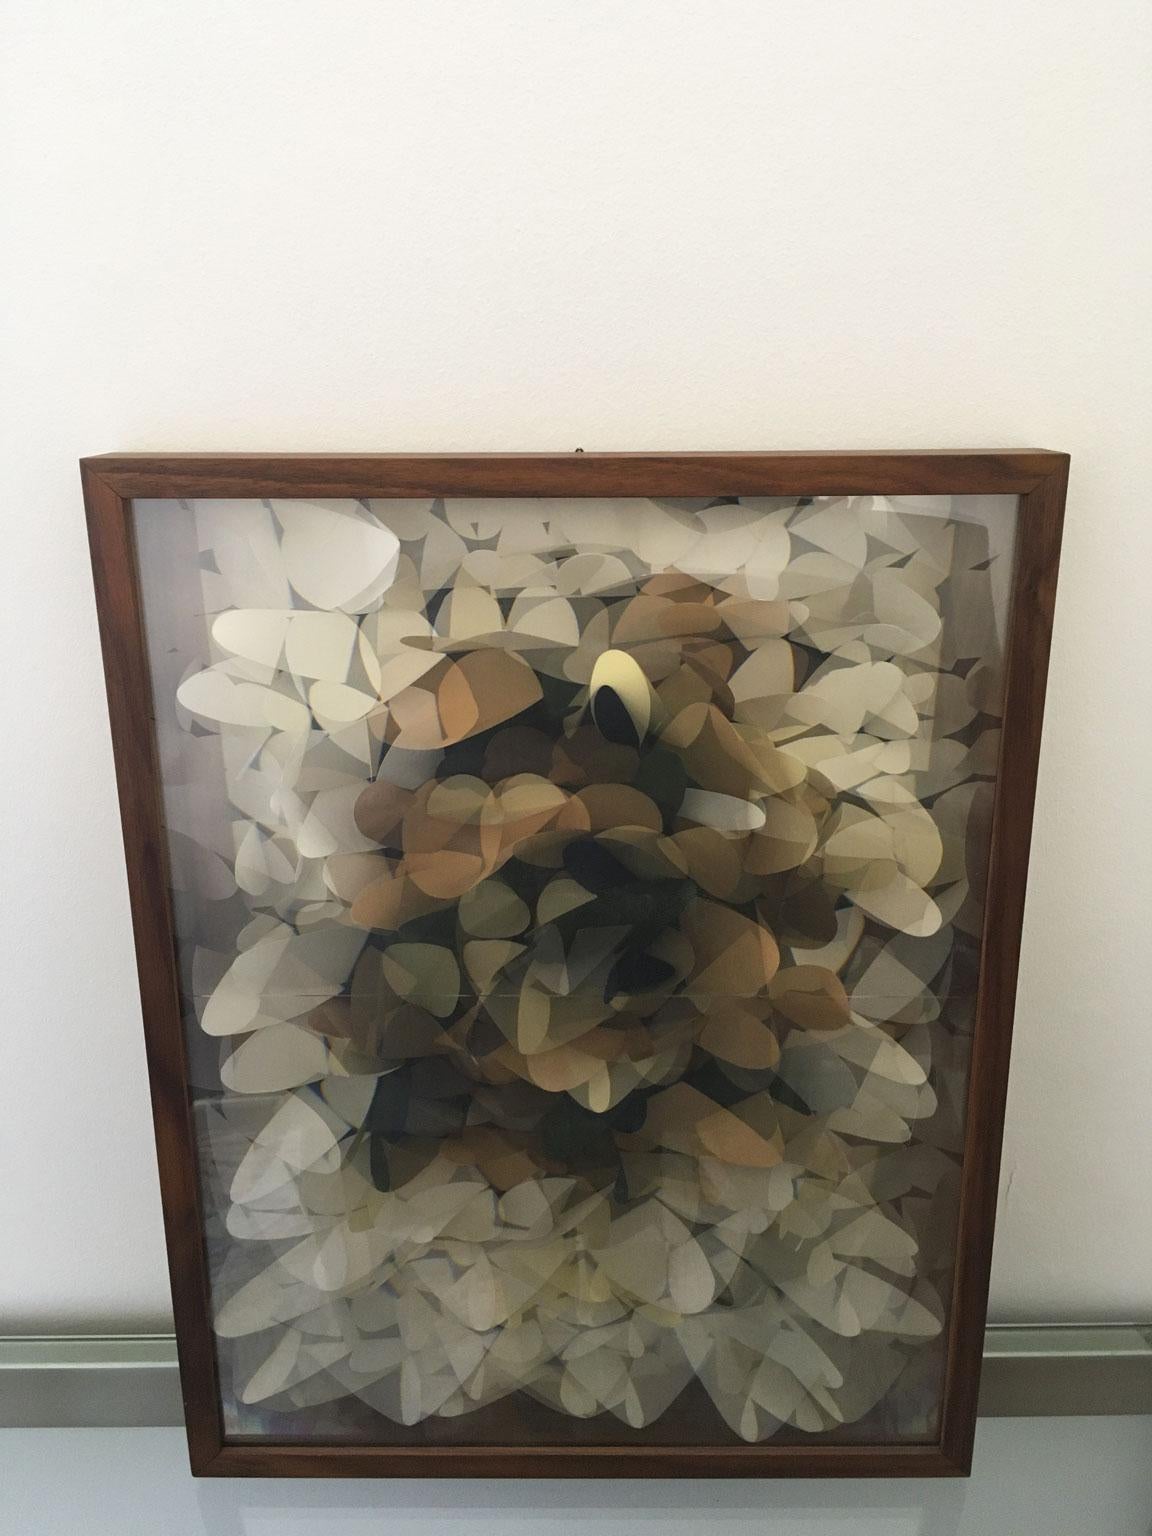 This artwork is a magical paper flowers assemblage, in a wood box framed, under a lenticular lense, inside a wooden box.
The unexpected view is a 3D effect. It was created by the Italian artist Maurizio Donzelli.
The Maurizio Donzelli 